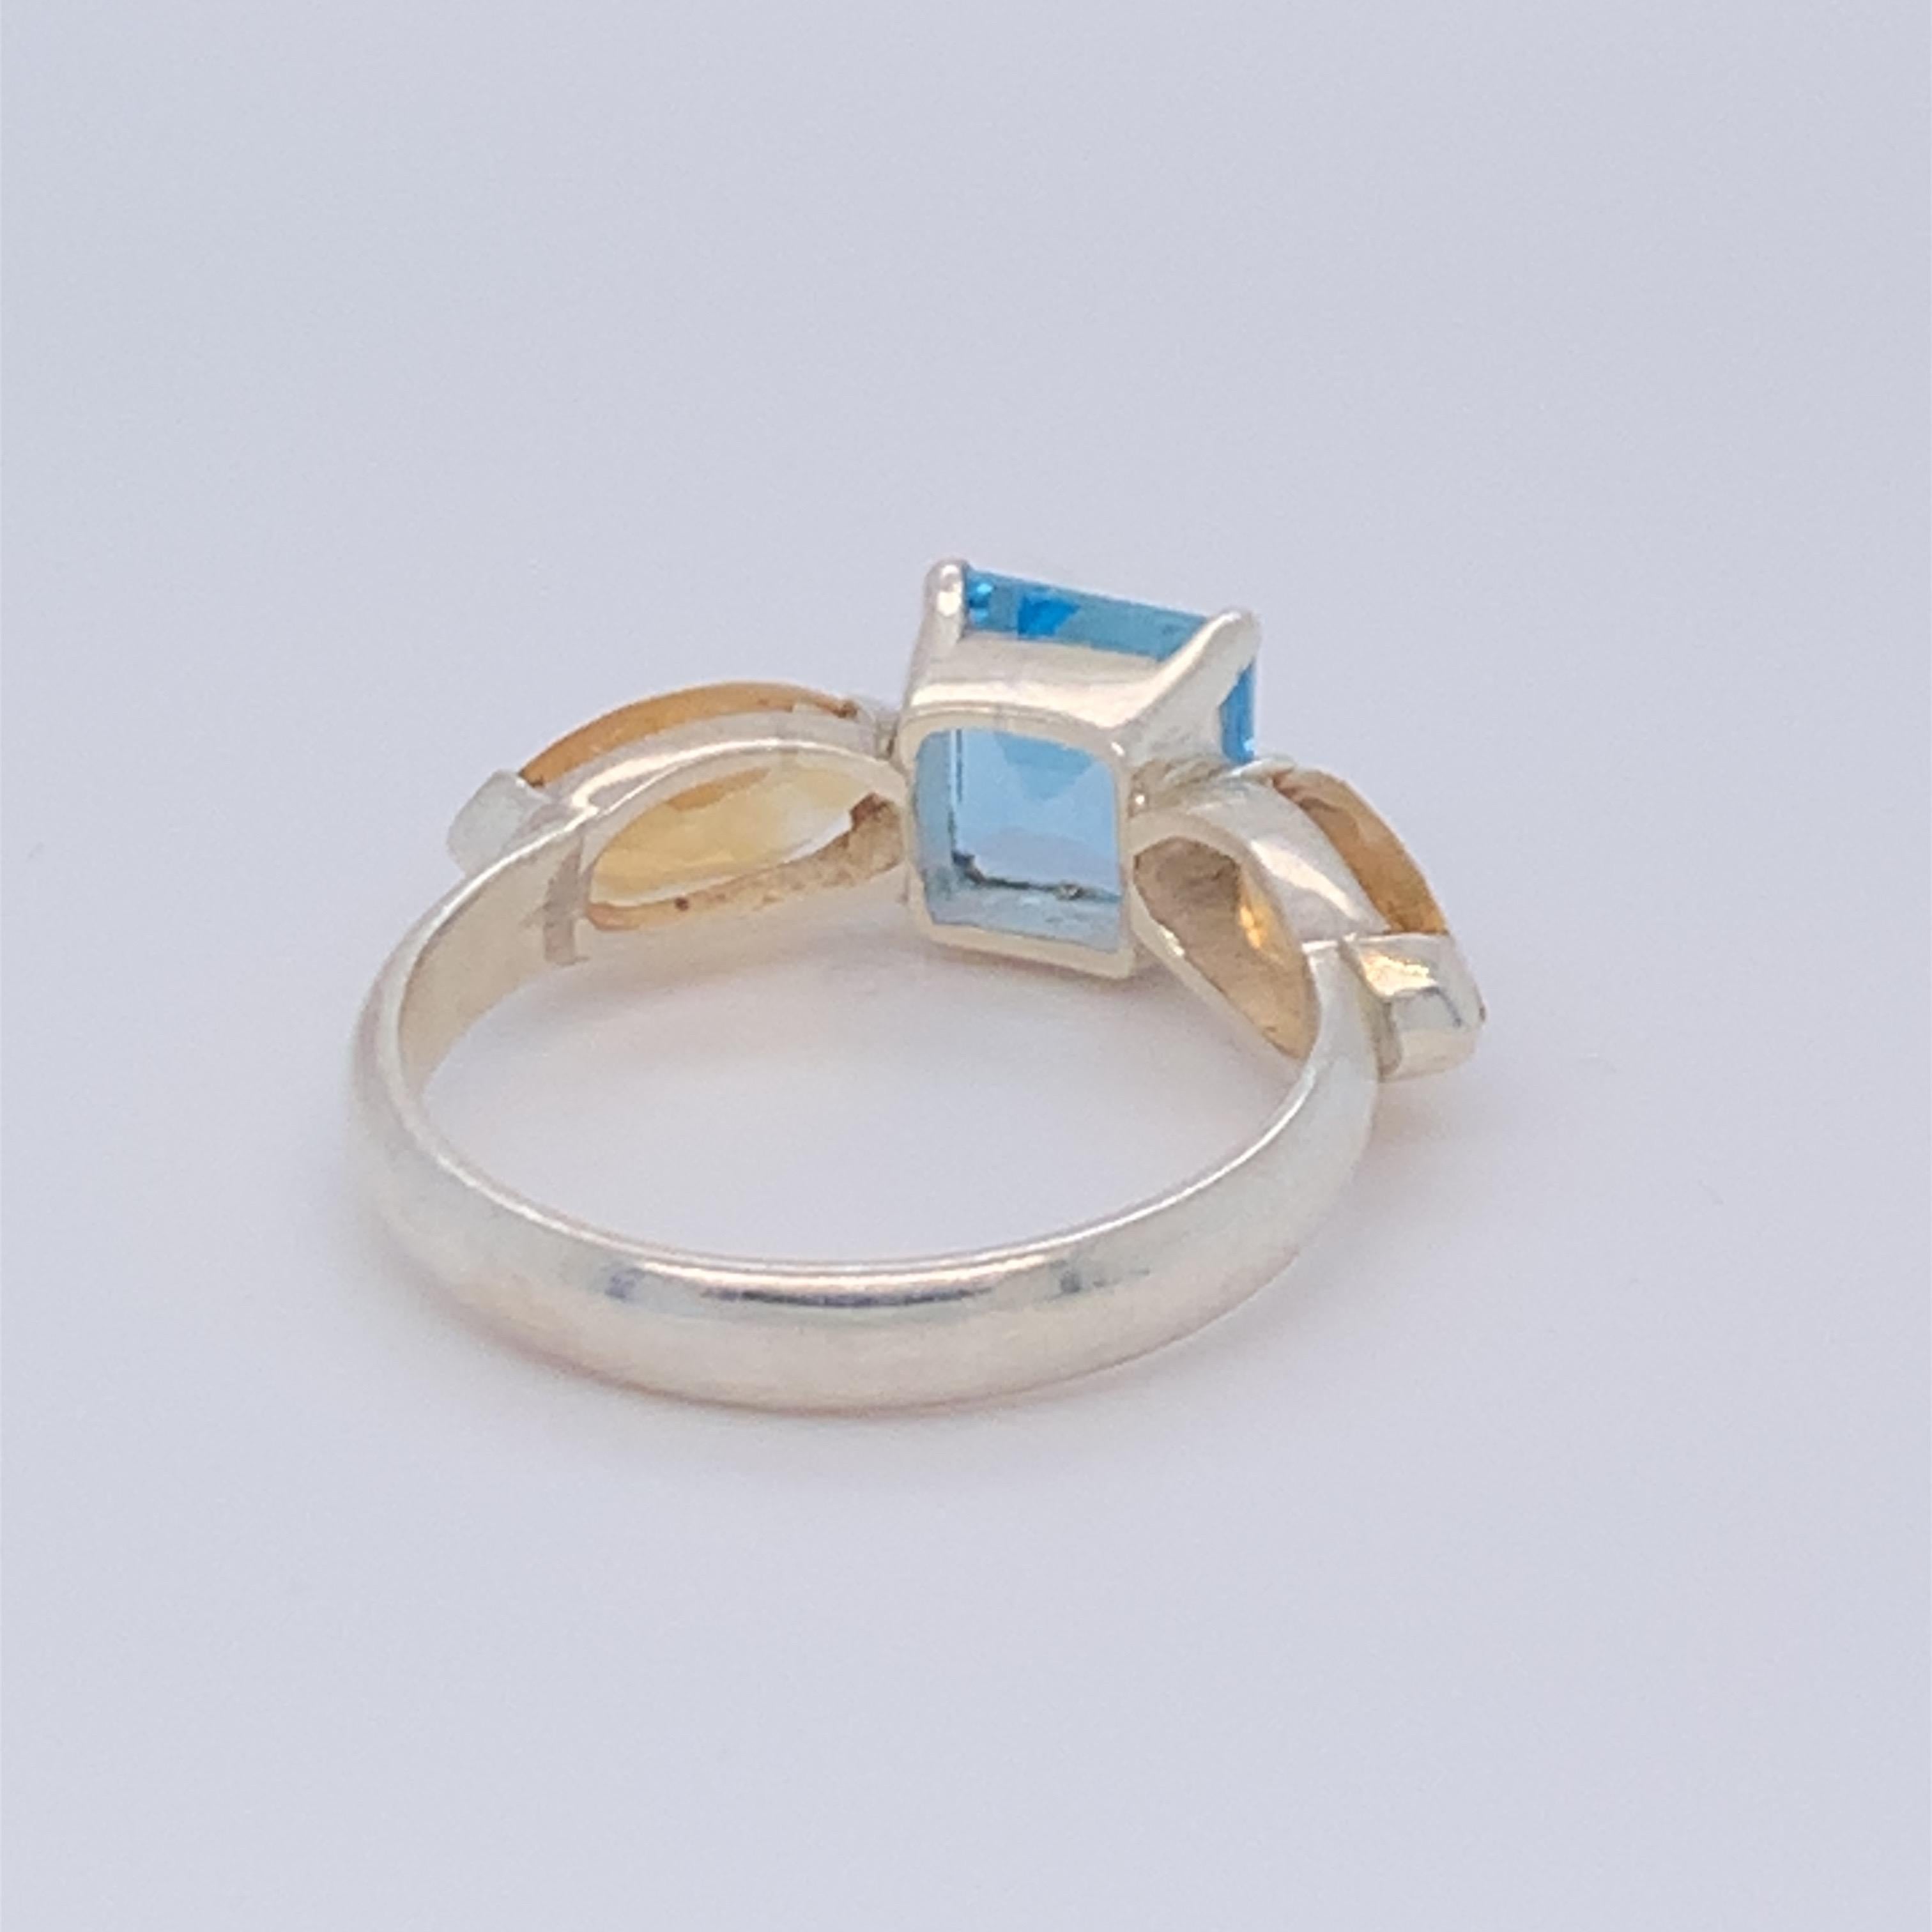 Handmade Sterling Silver Blue Topaz and Citrine Ring In New Condition For Sale In Trumbull, CT